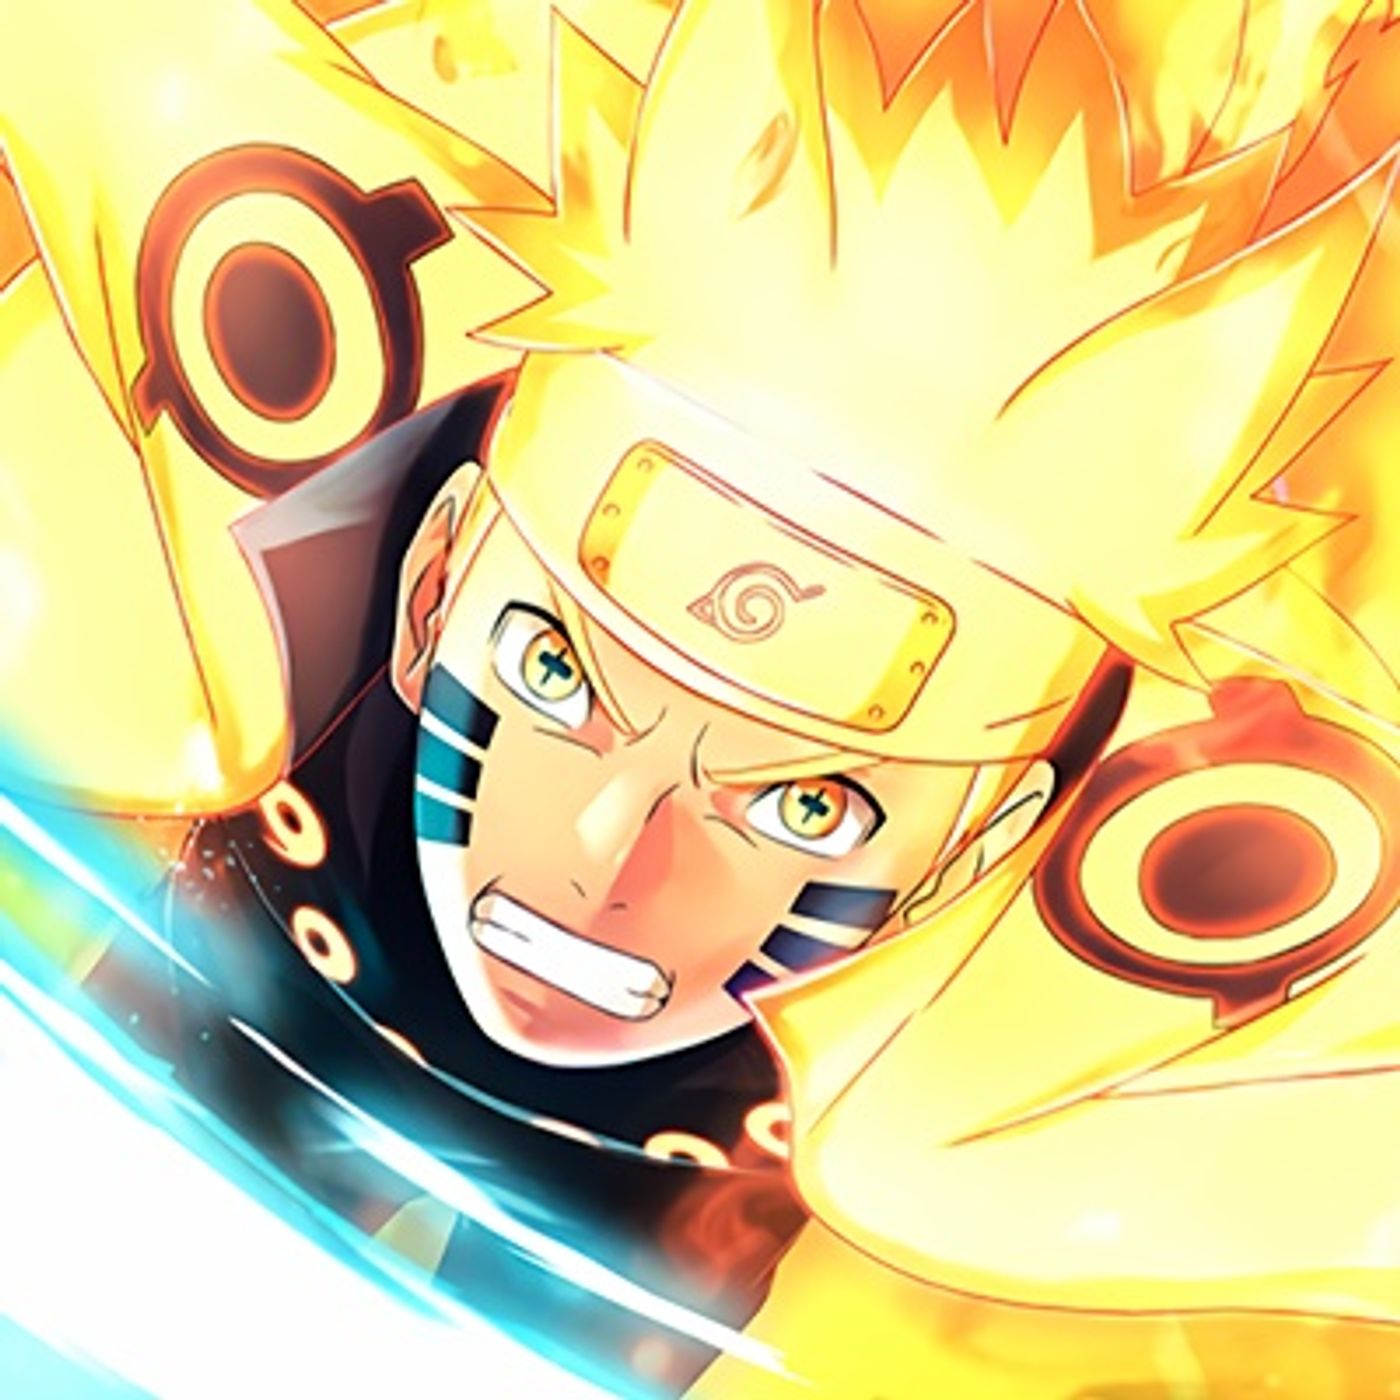 NARUTO BREAKS FREE! (Chapters 525-536)